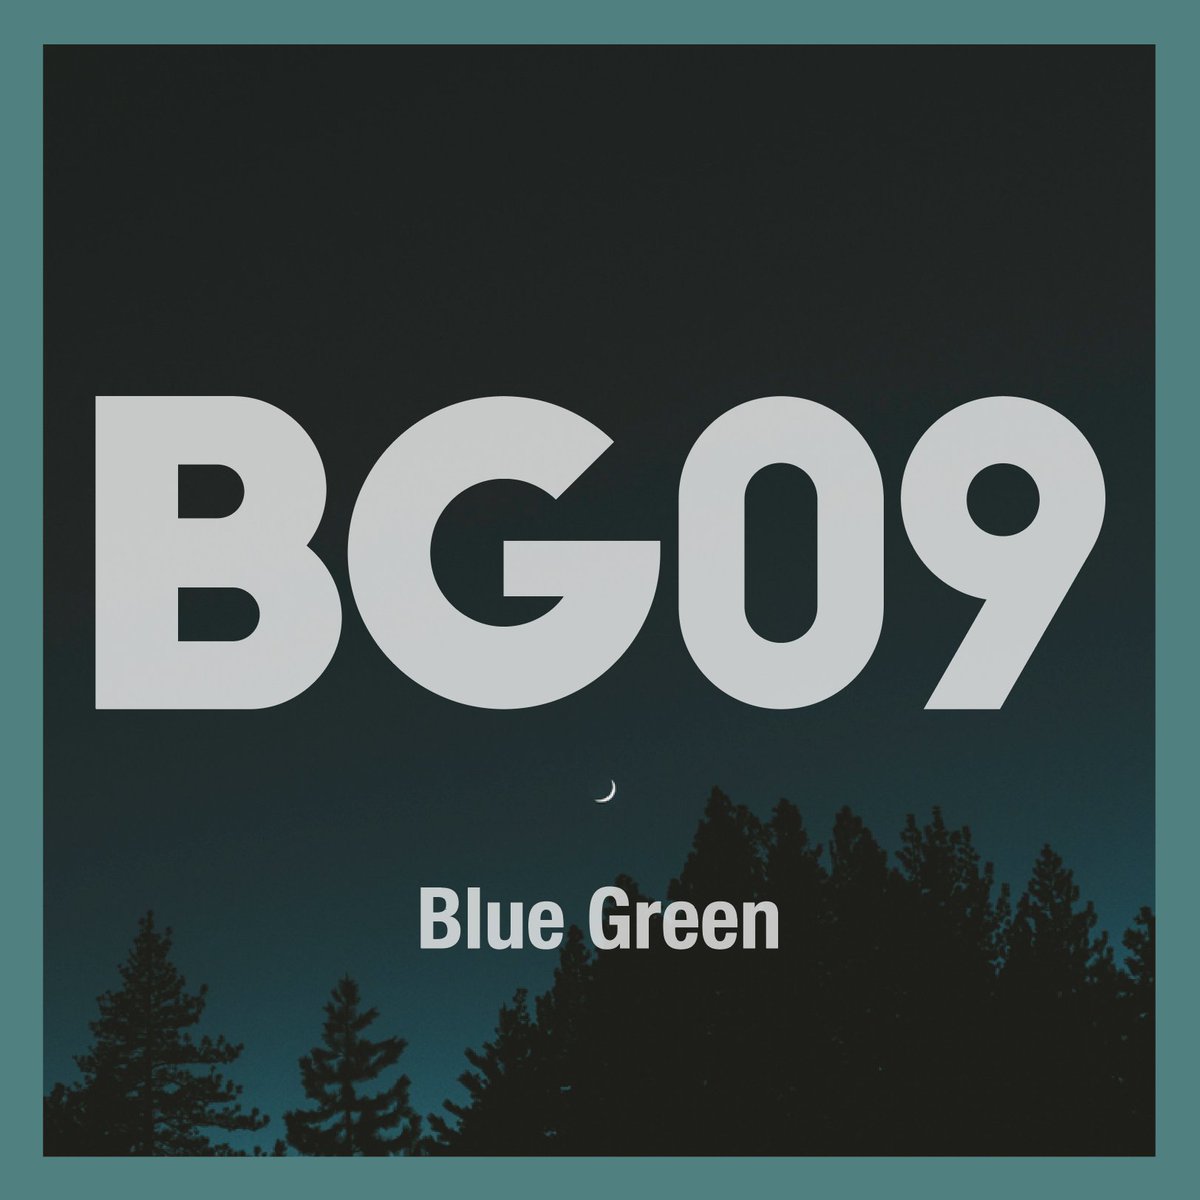 BG09 - Blue Green This Blue Green shade is inspired by the traditional Japanese color Asagi, evoking cool tones and the twilight of an evening sky.